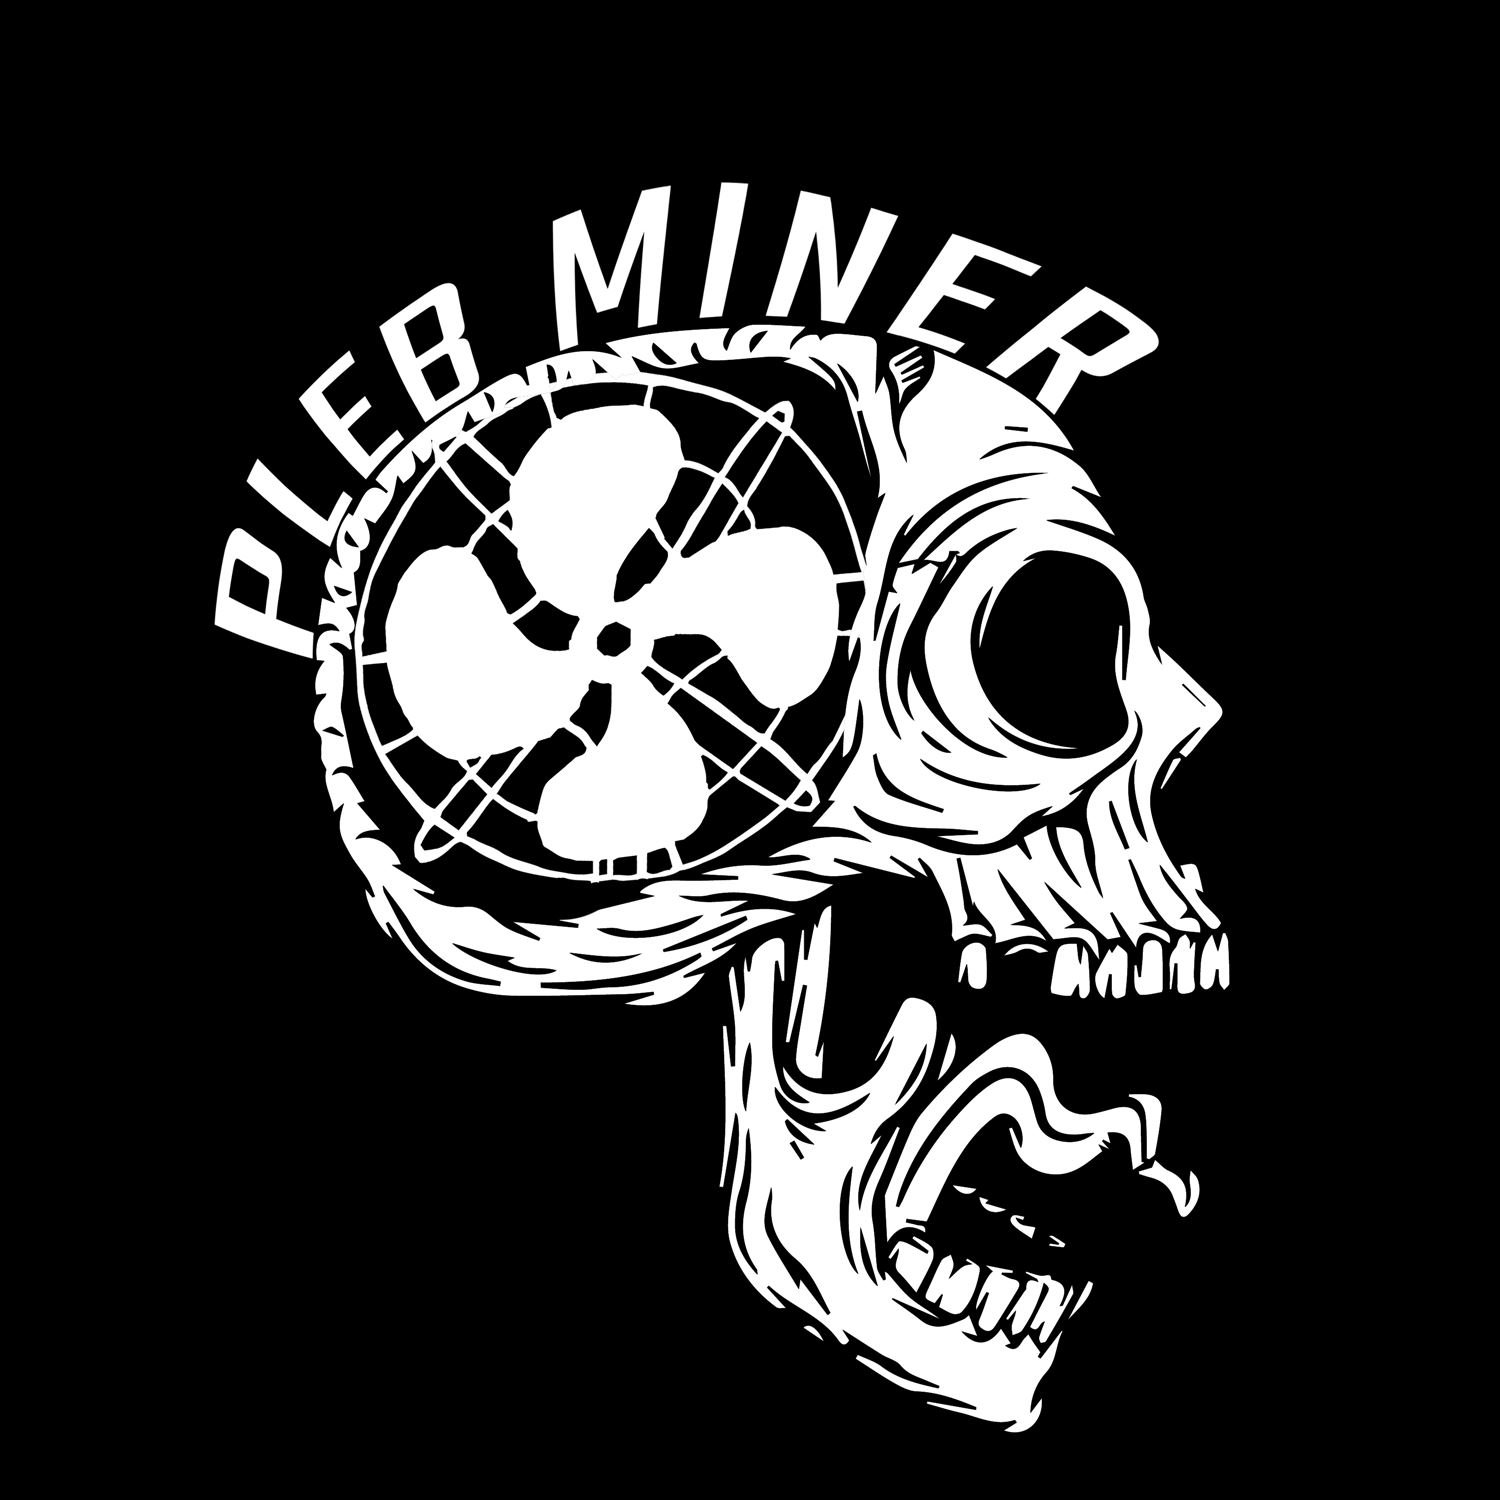 Pleb miner month update and prize draw. Bitcoin wins.